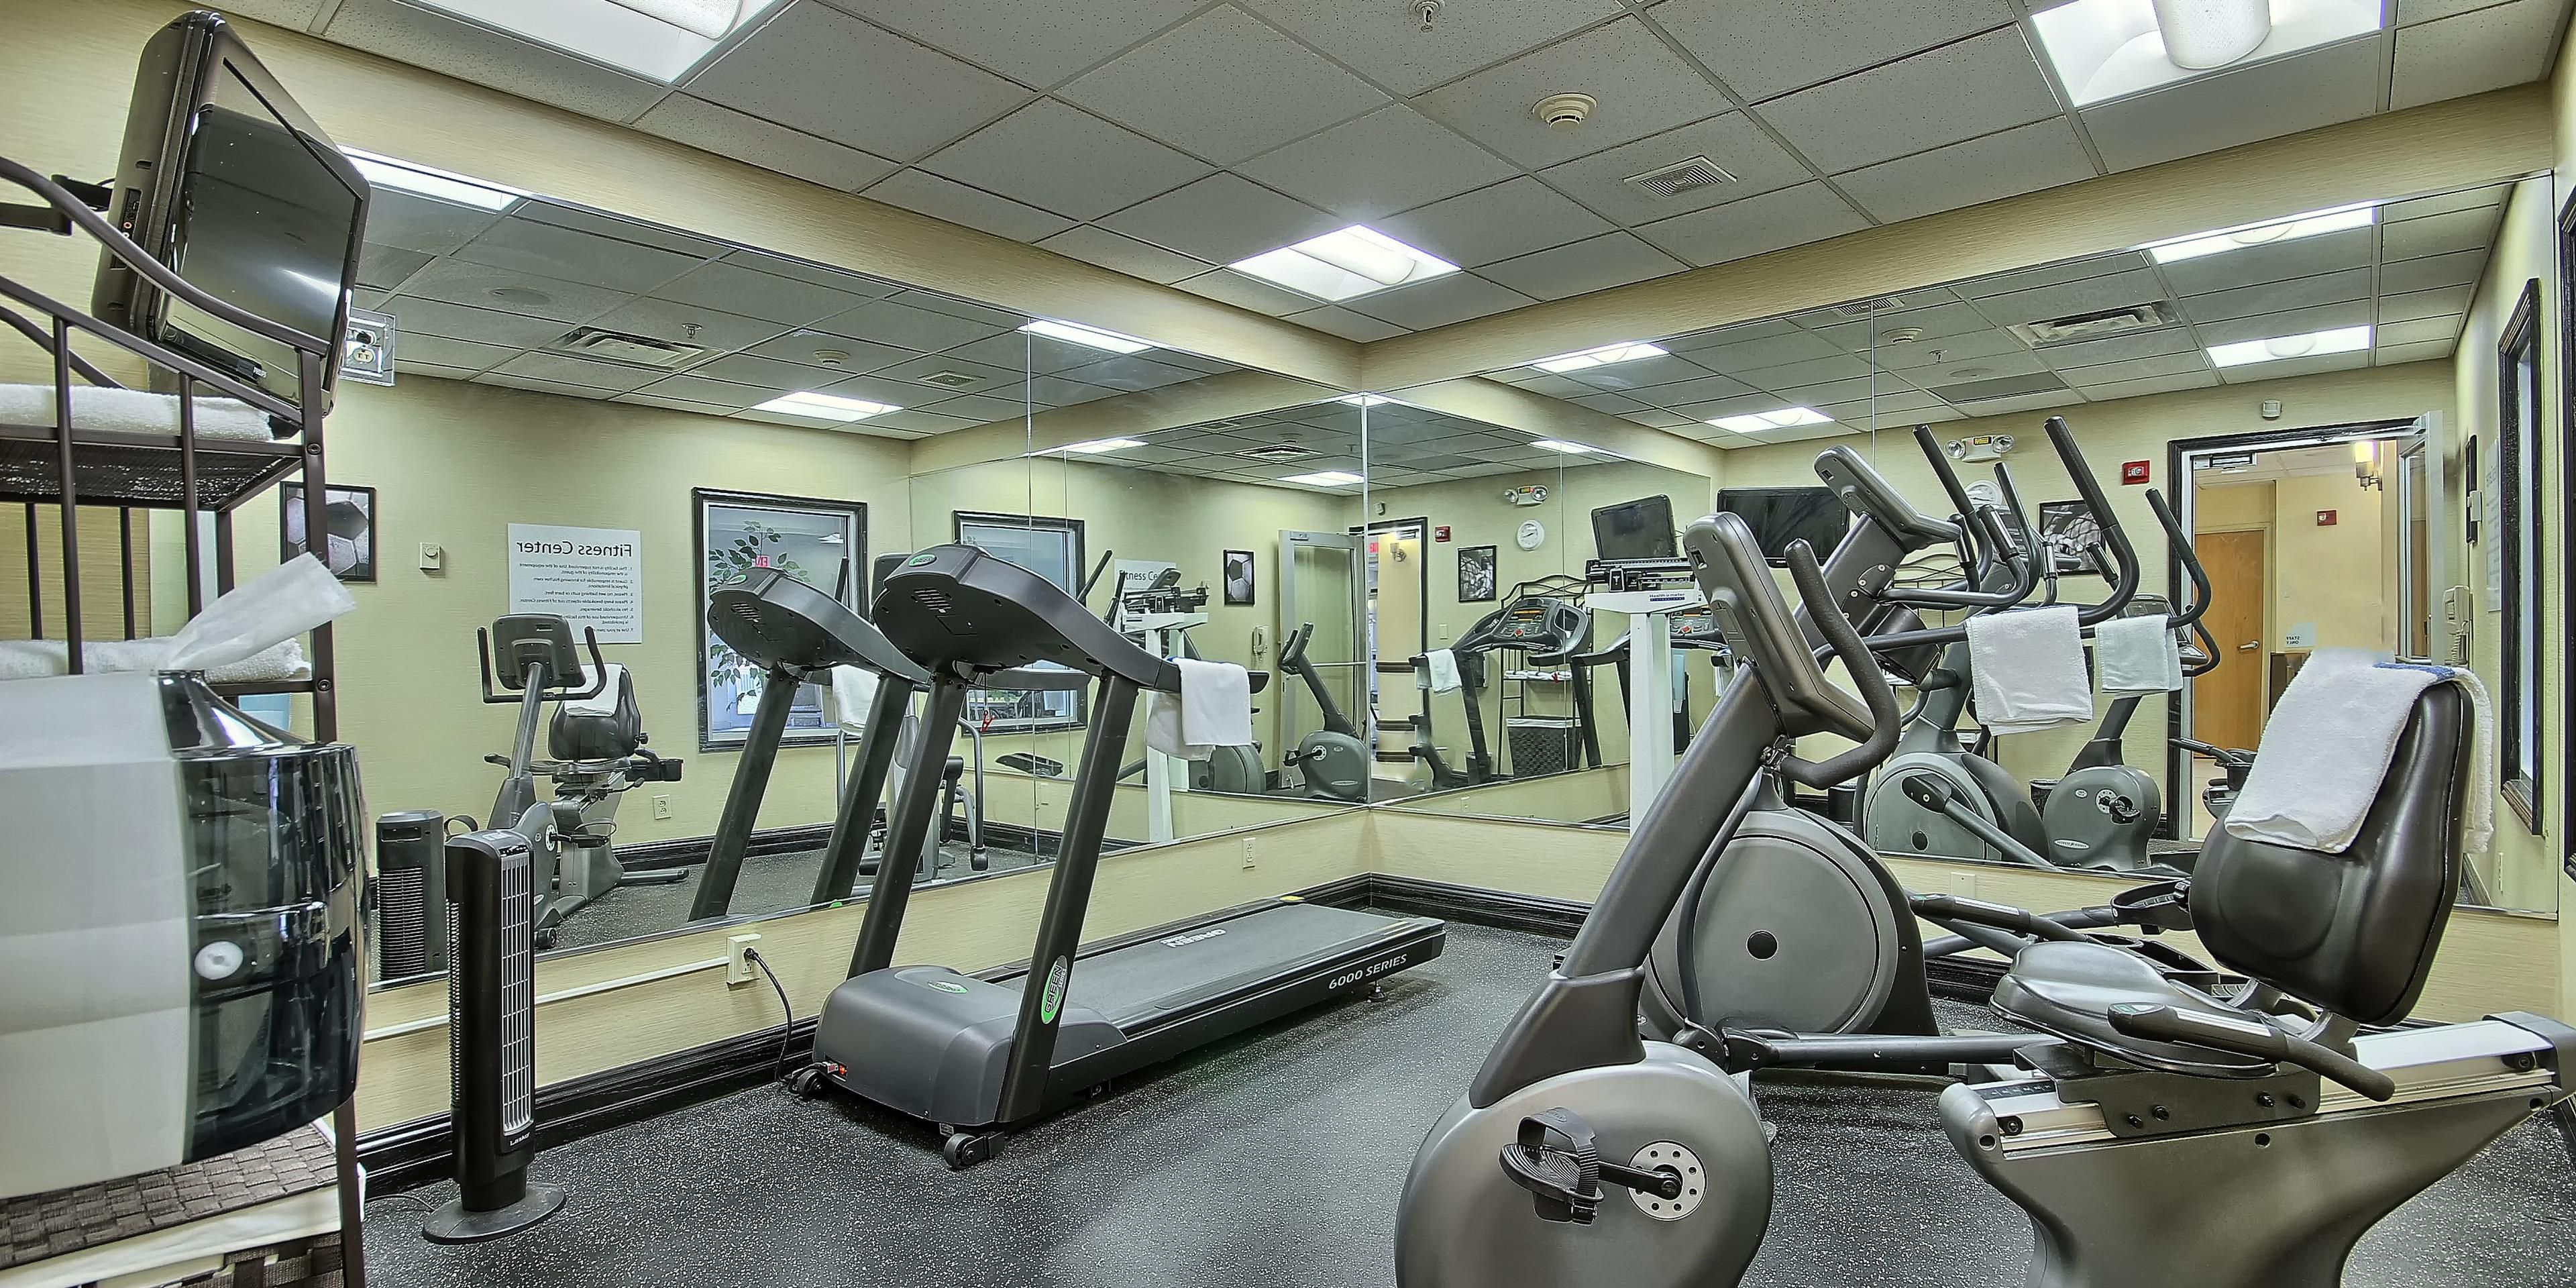 Head down to the lobby to experience a renovated exercise room with cardio equipment galore! Enjoy watching your favorite tv shows on brand new state of the art of equipment. A dumbbell rack with weights ranging from 10-50 pounds. Room includes multiple treadmills, ellipticals and a stationary bike.